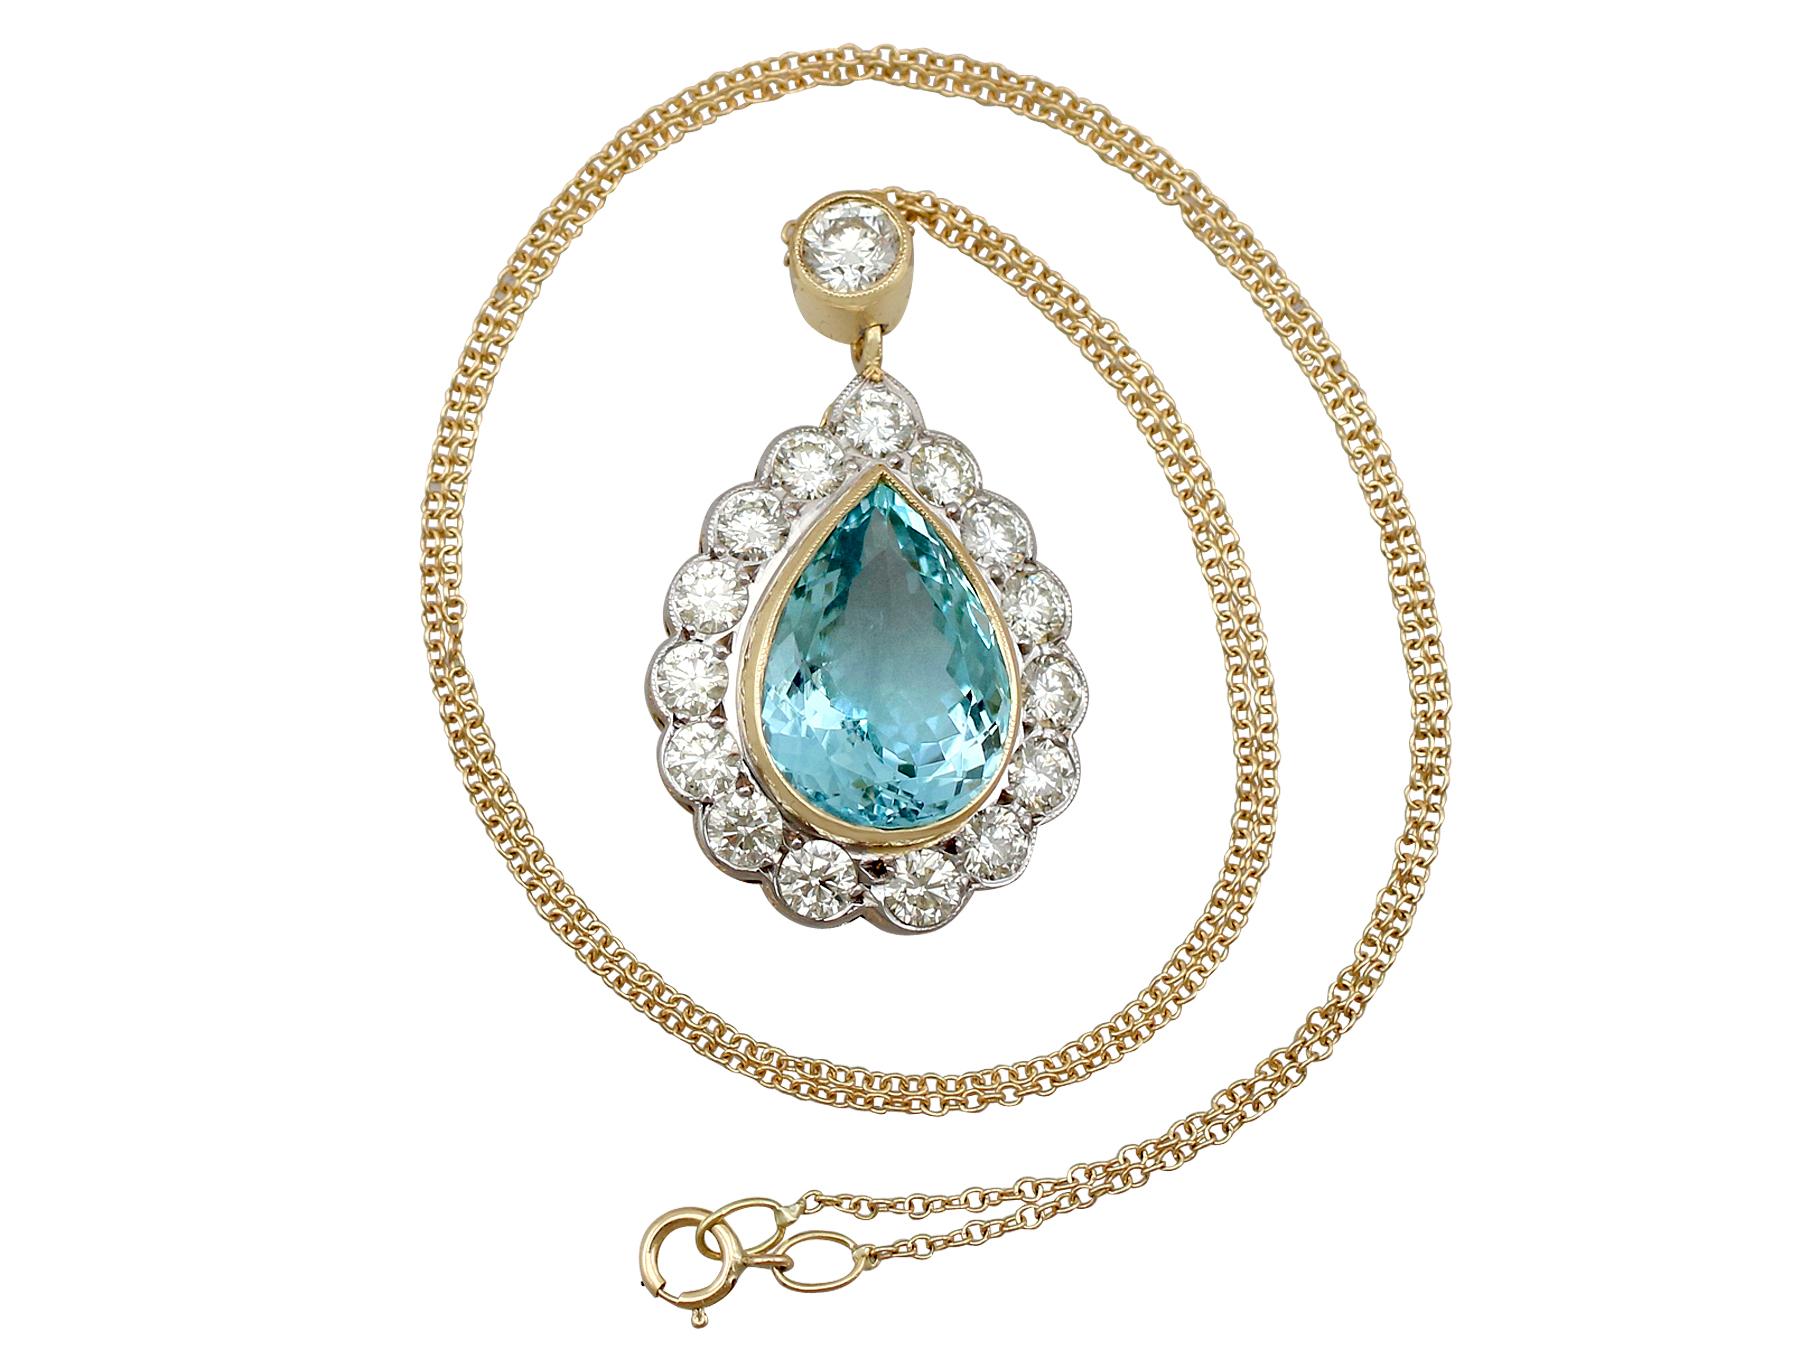 A stunning vintage 3.16 carat aquamarine and 3.16 carat diamond, 18 carat yellow and white gold necklace; part of our diverse vintage jewellery and estate jewelry collections.

This stunning, fine and impressive pear cut aquamarine necklace has been